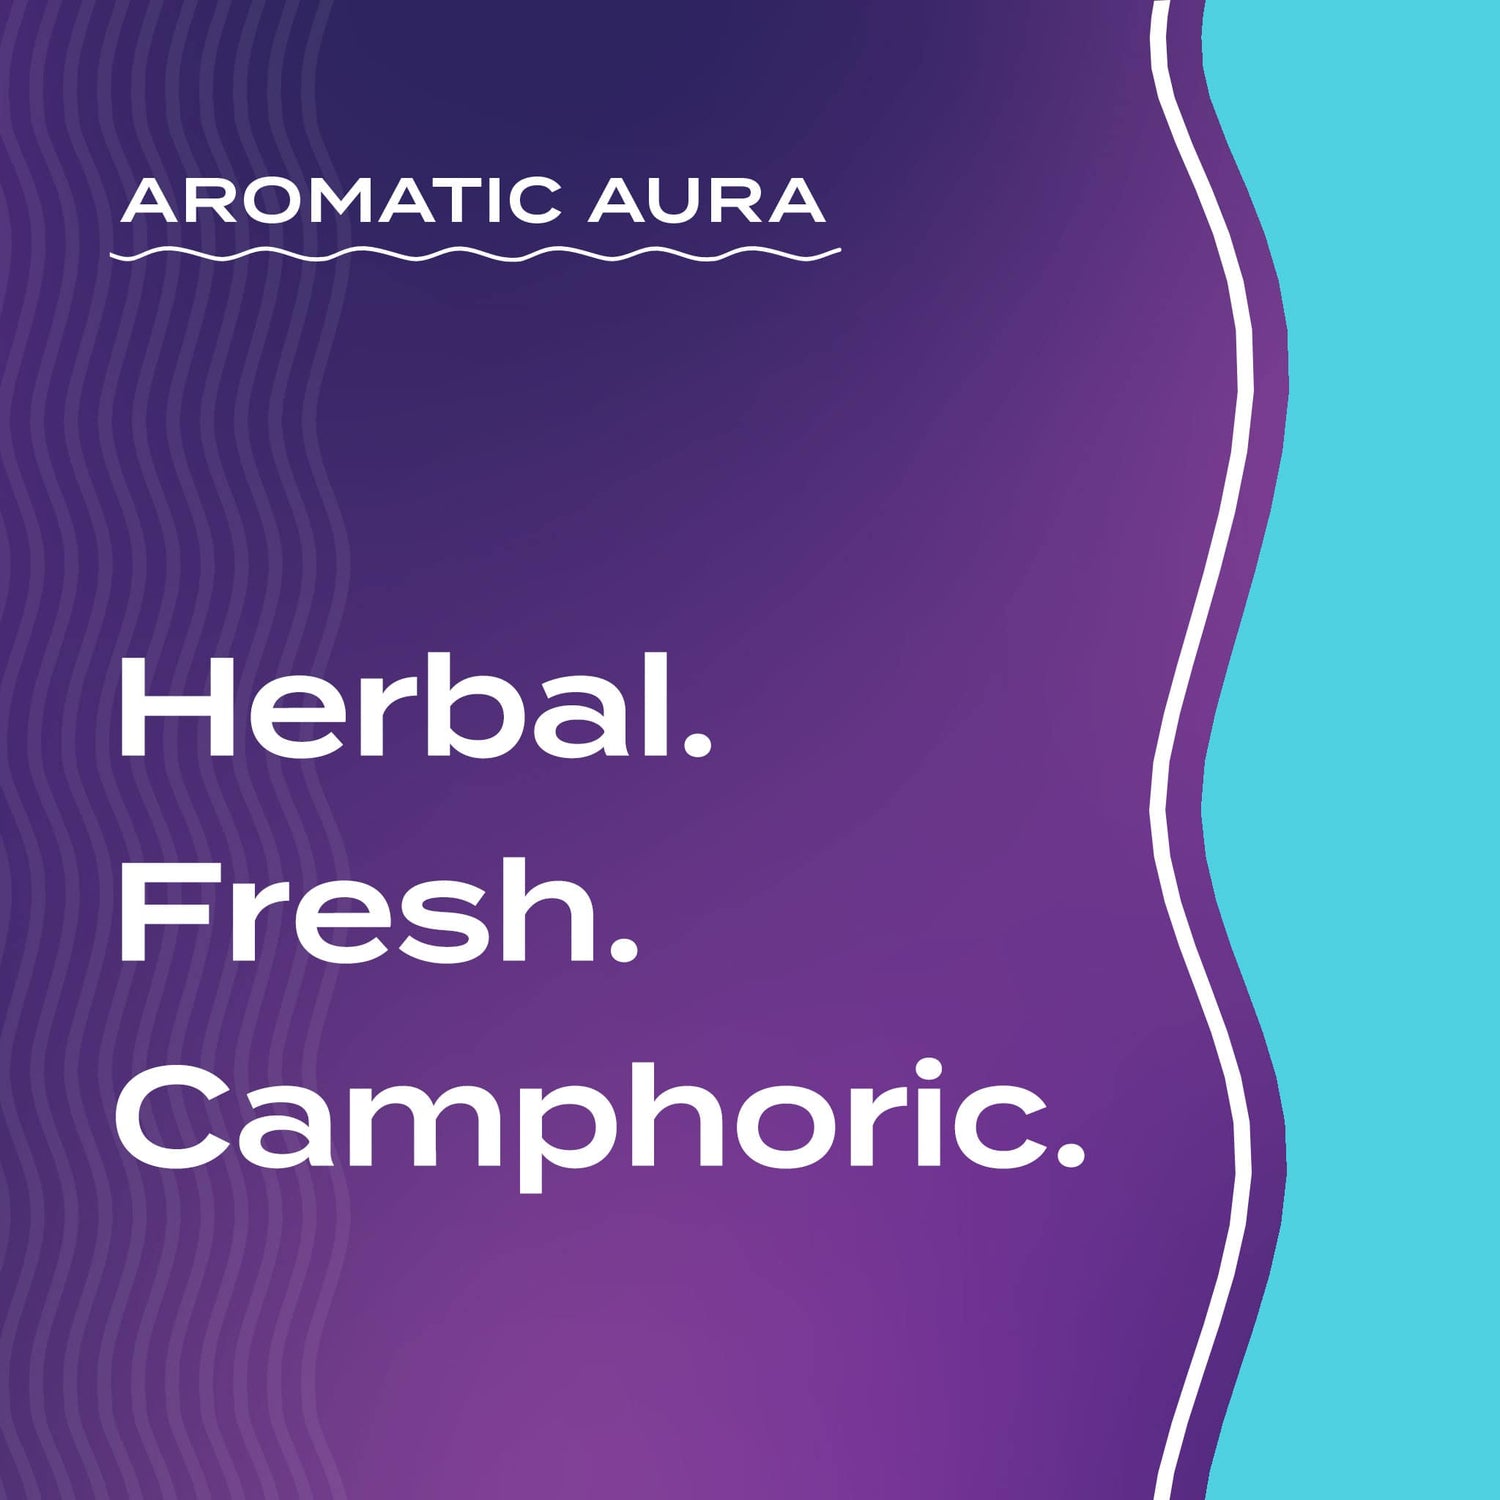 Text graphic depicting the aromatic aroma of Eucalyptus: Herbal, Fresh, Camphoric.